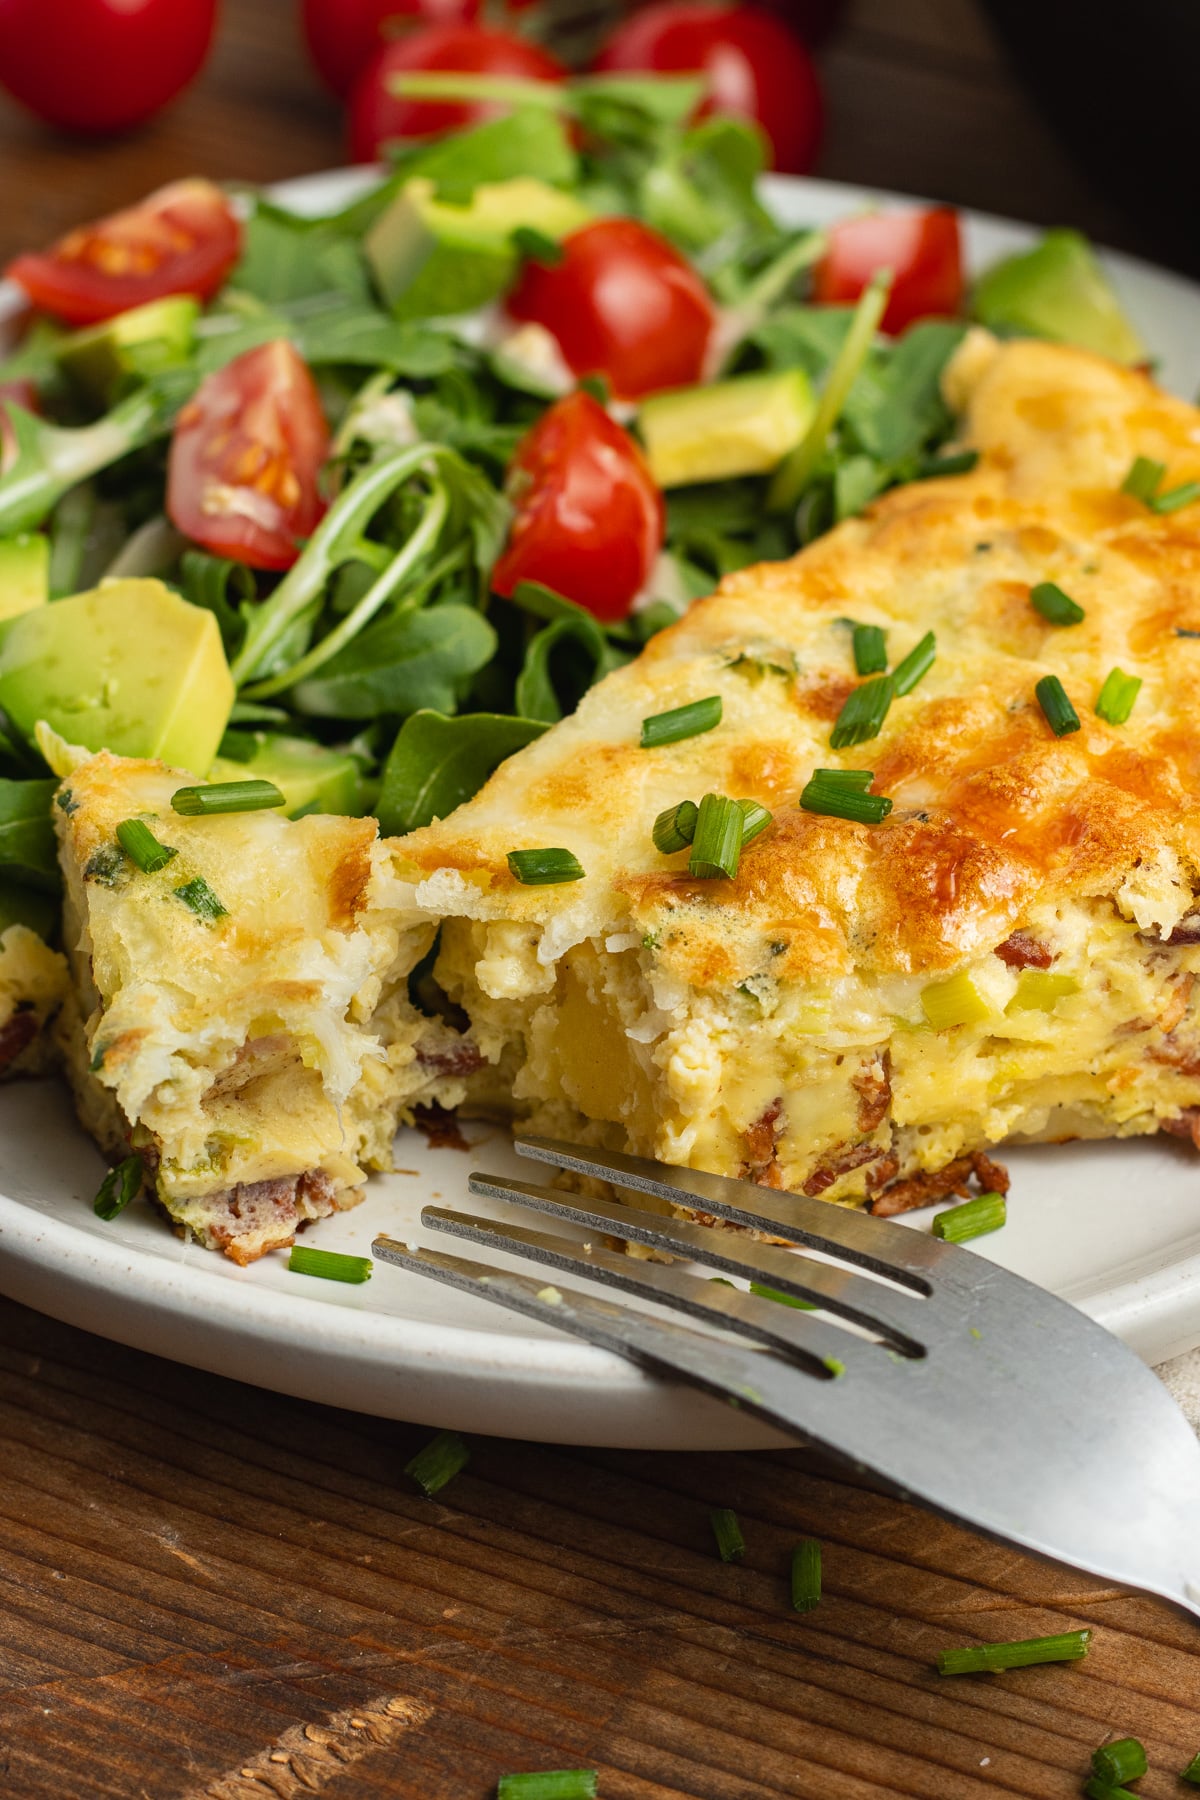 This is a close up picture of the frittata.